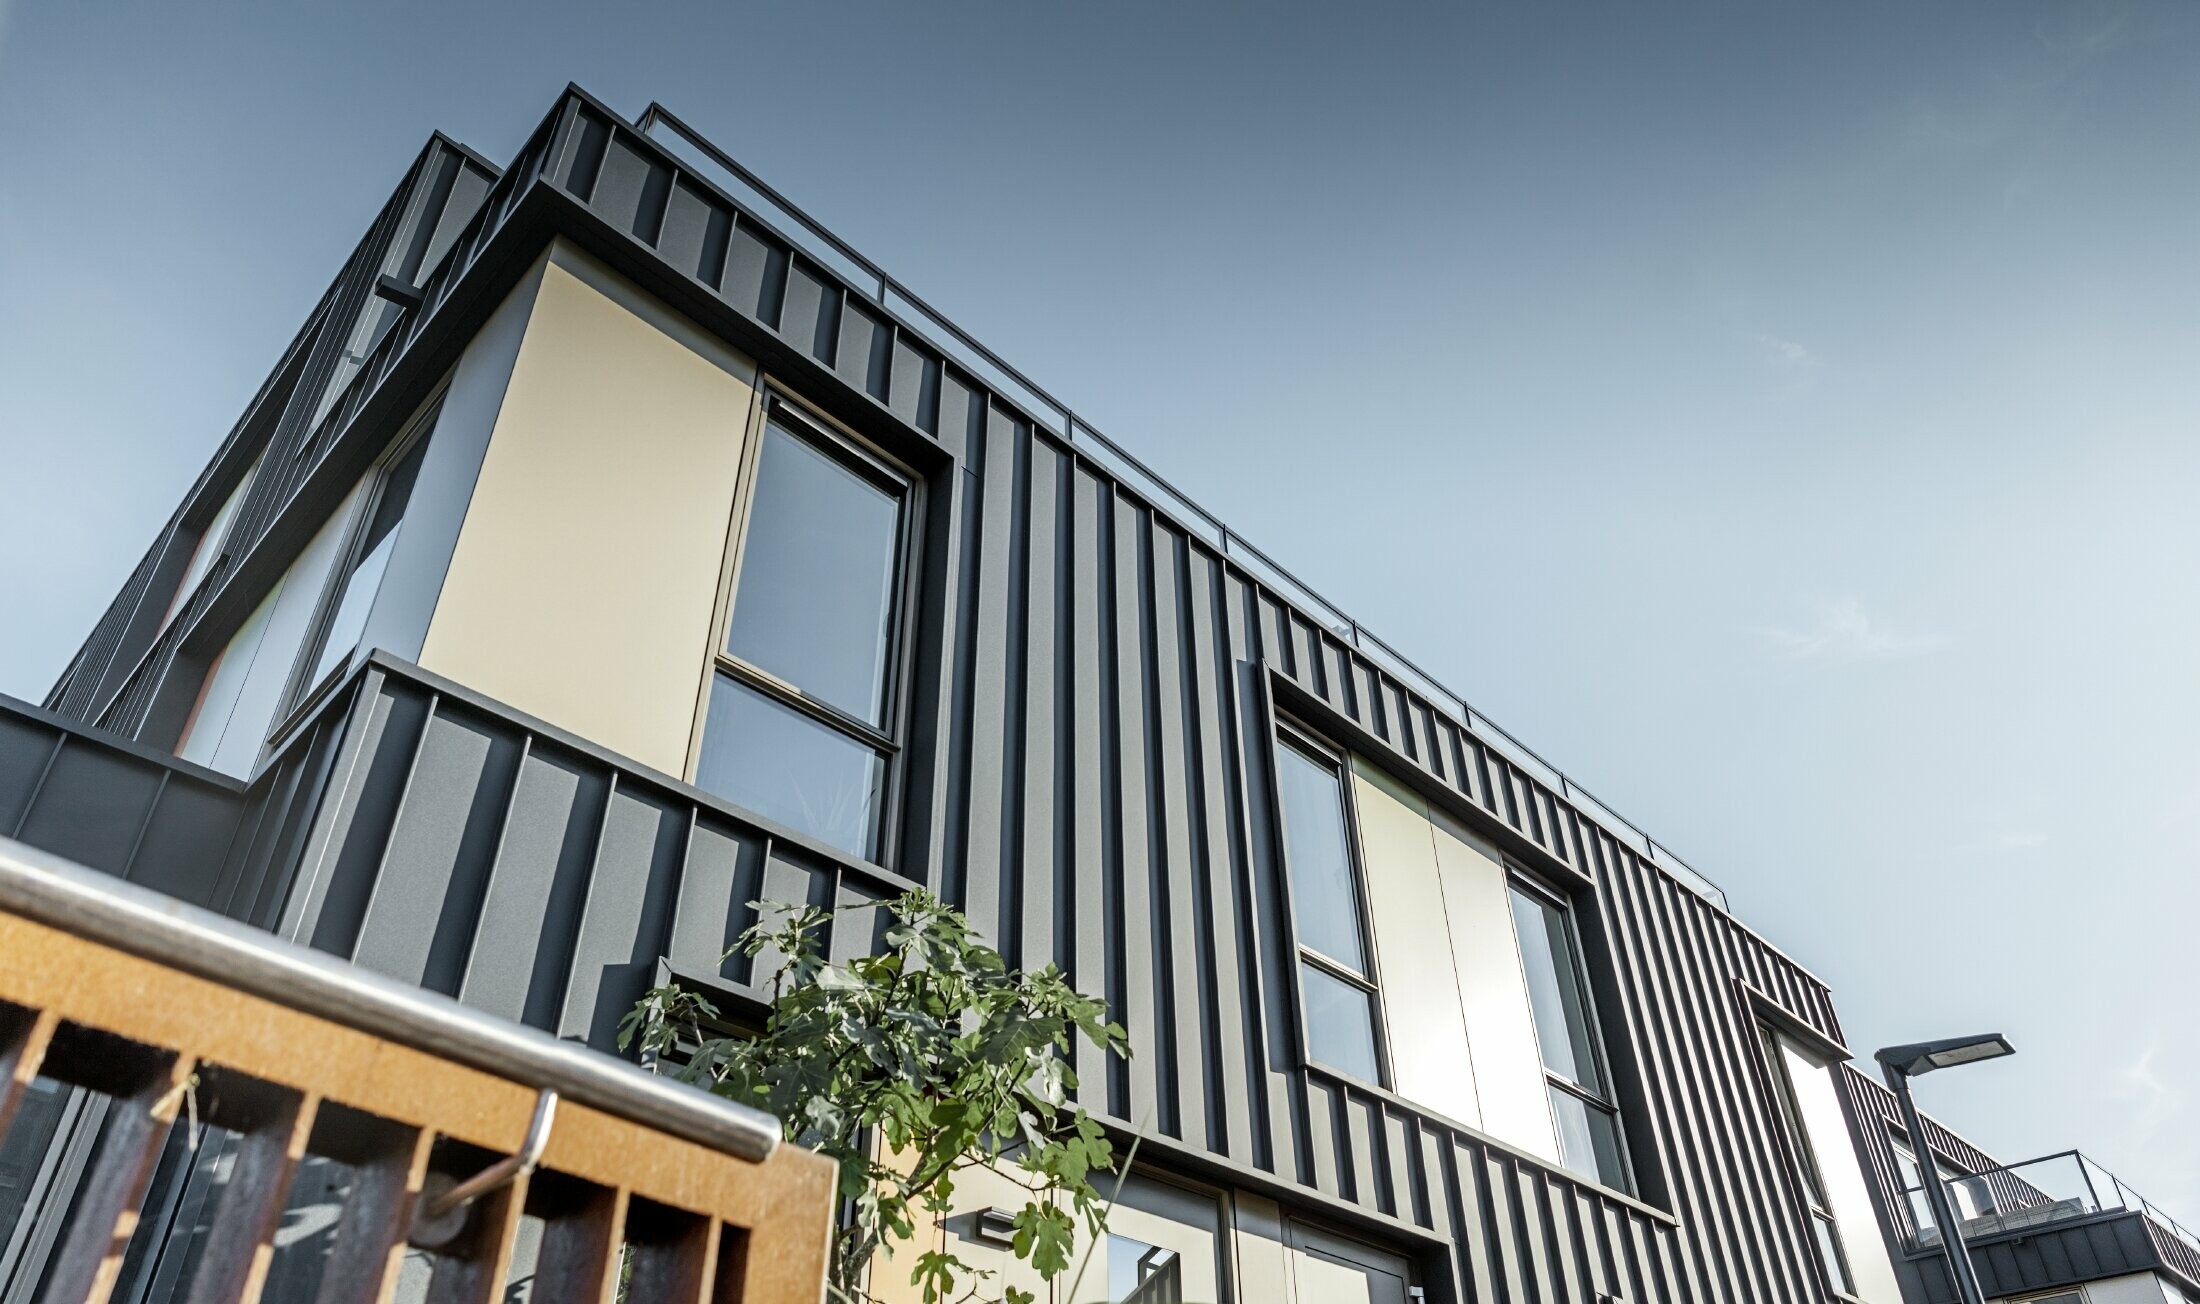 Semi-detached houses in Amsterdam with a PREFA façade cladding – Prefalz in P.10 anthracite.